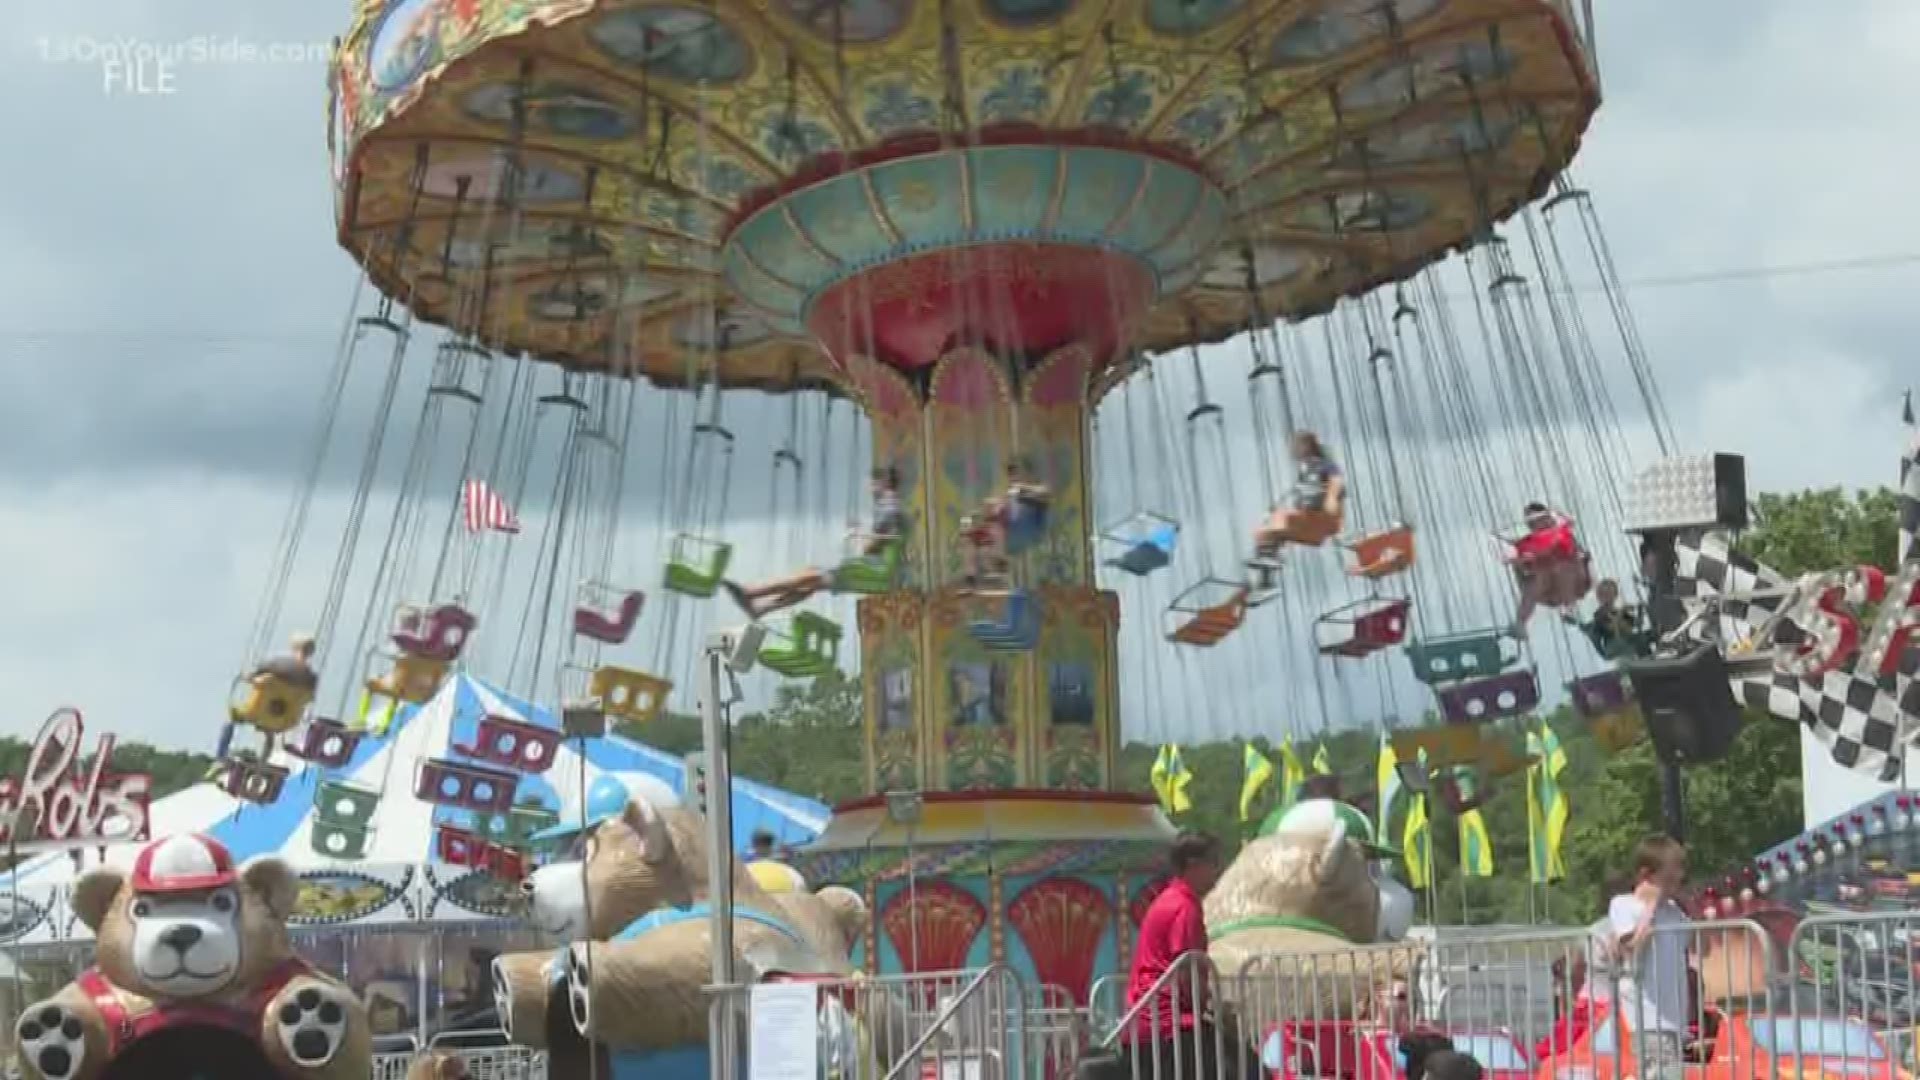 The heat that's blanketed West Michigan has forced local festival and fairs to open a little later than anticipated. Organizers of the Ionia Free Fair, local race tracks and more say the changes are to keep fans and employees safe.